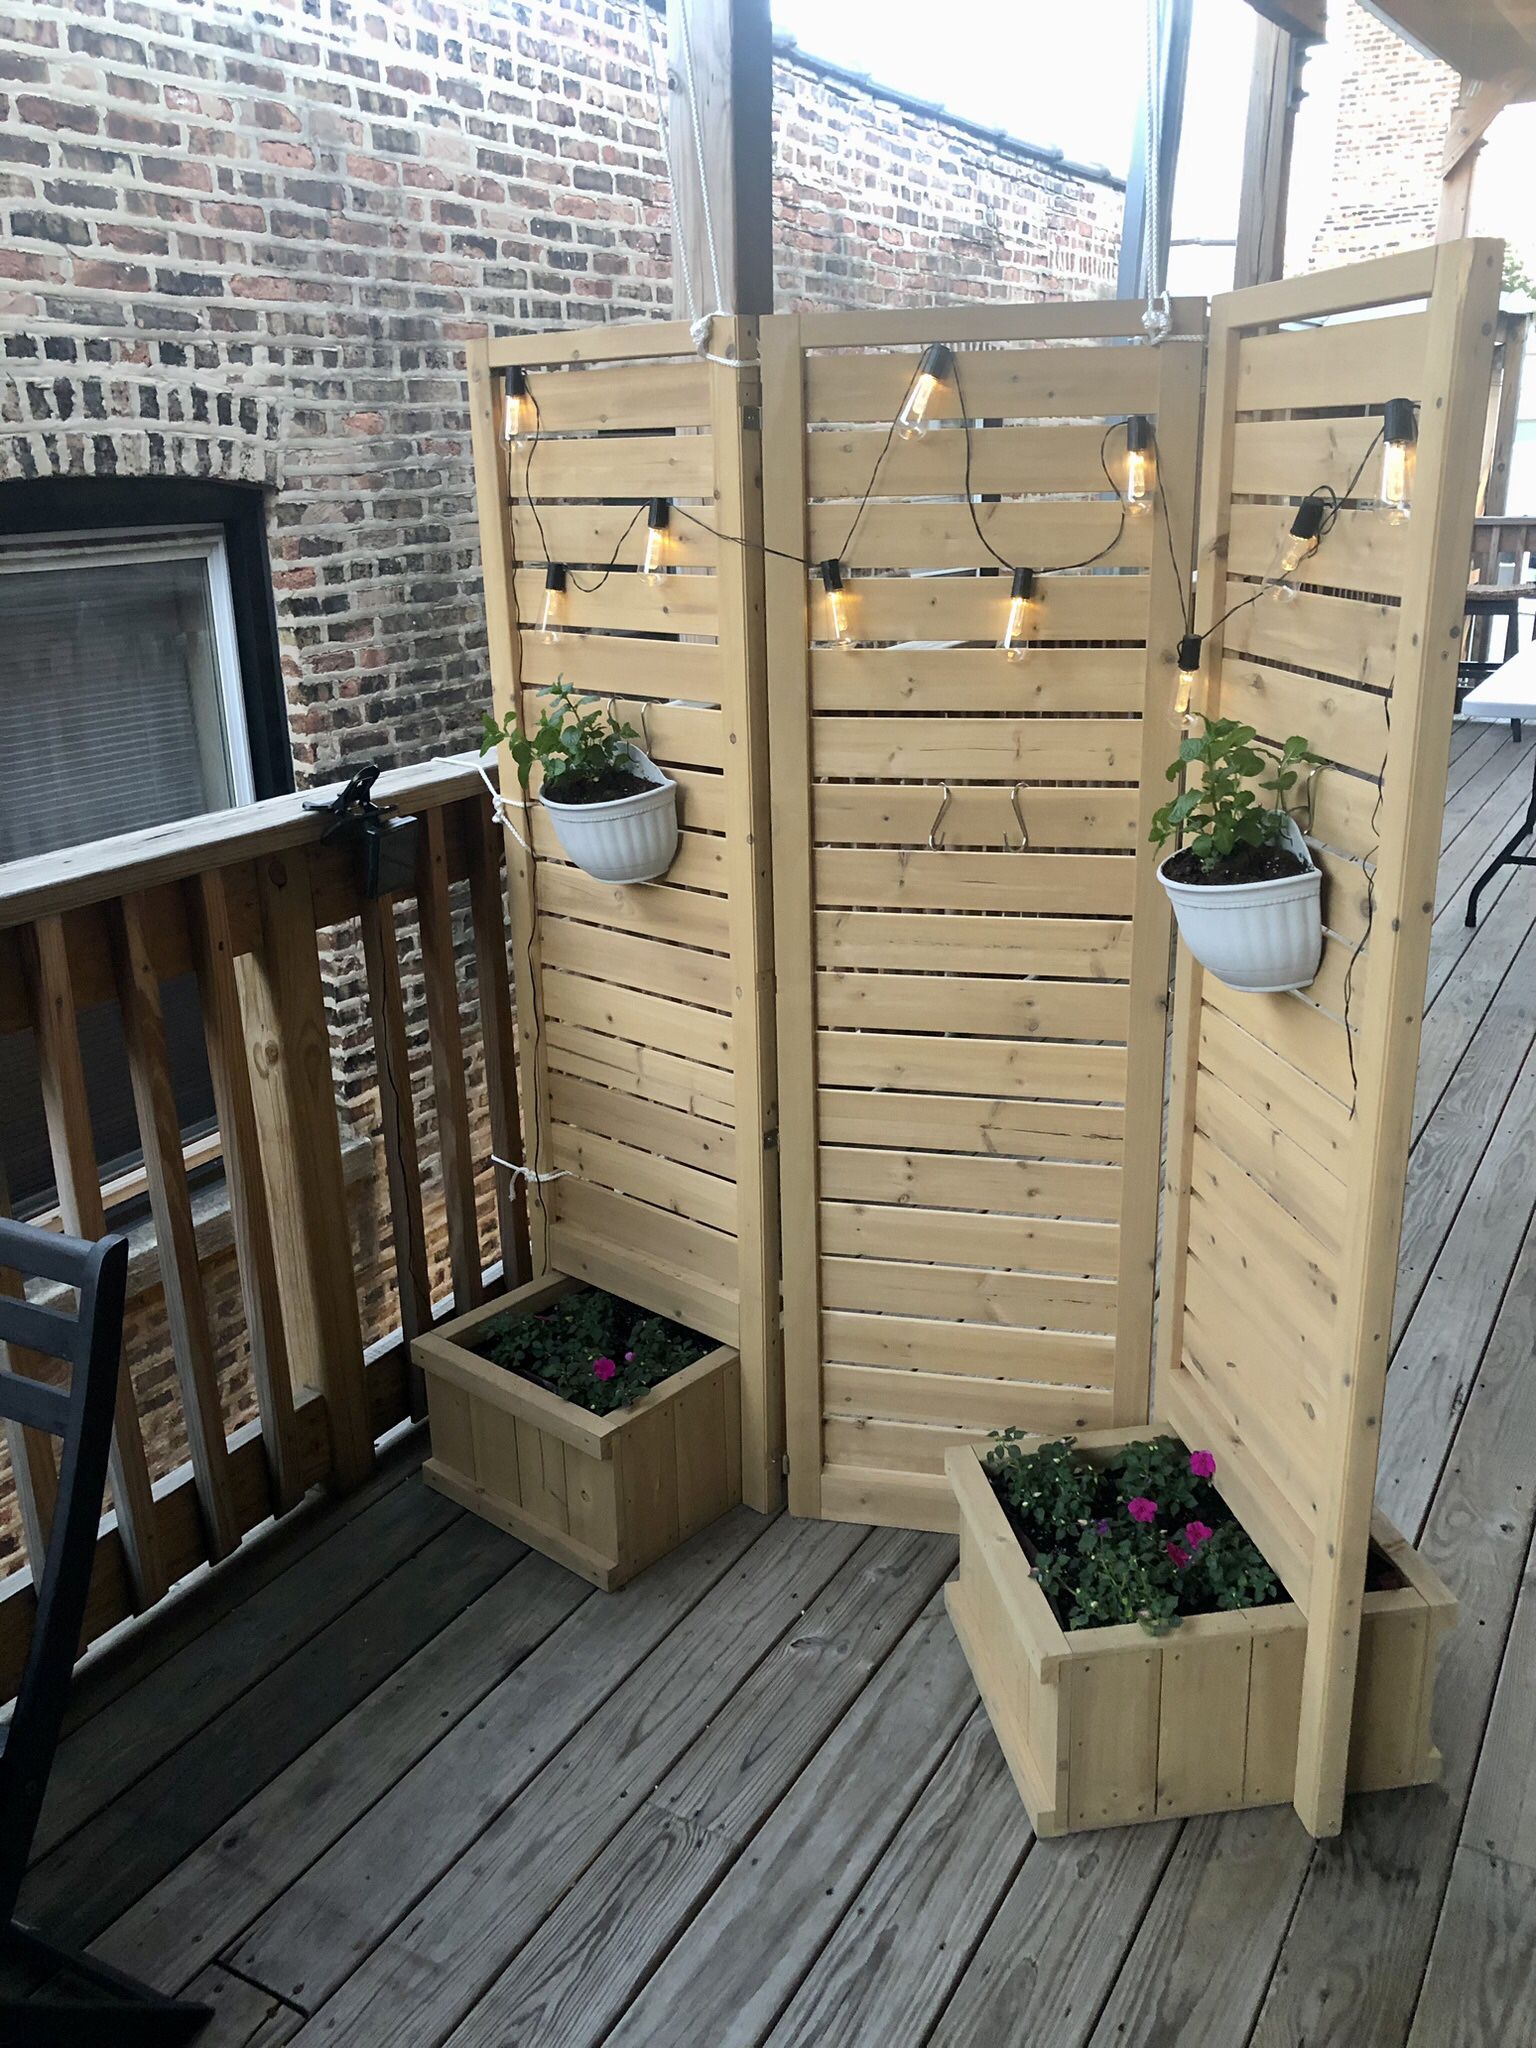 Cedar Privacy Screen/Planter - Need Gone By 5/19